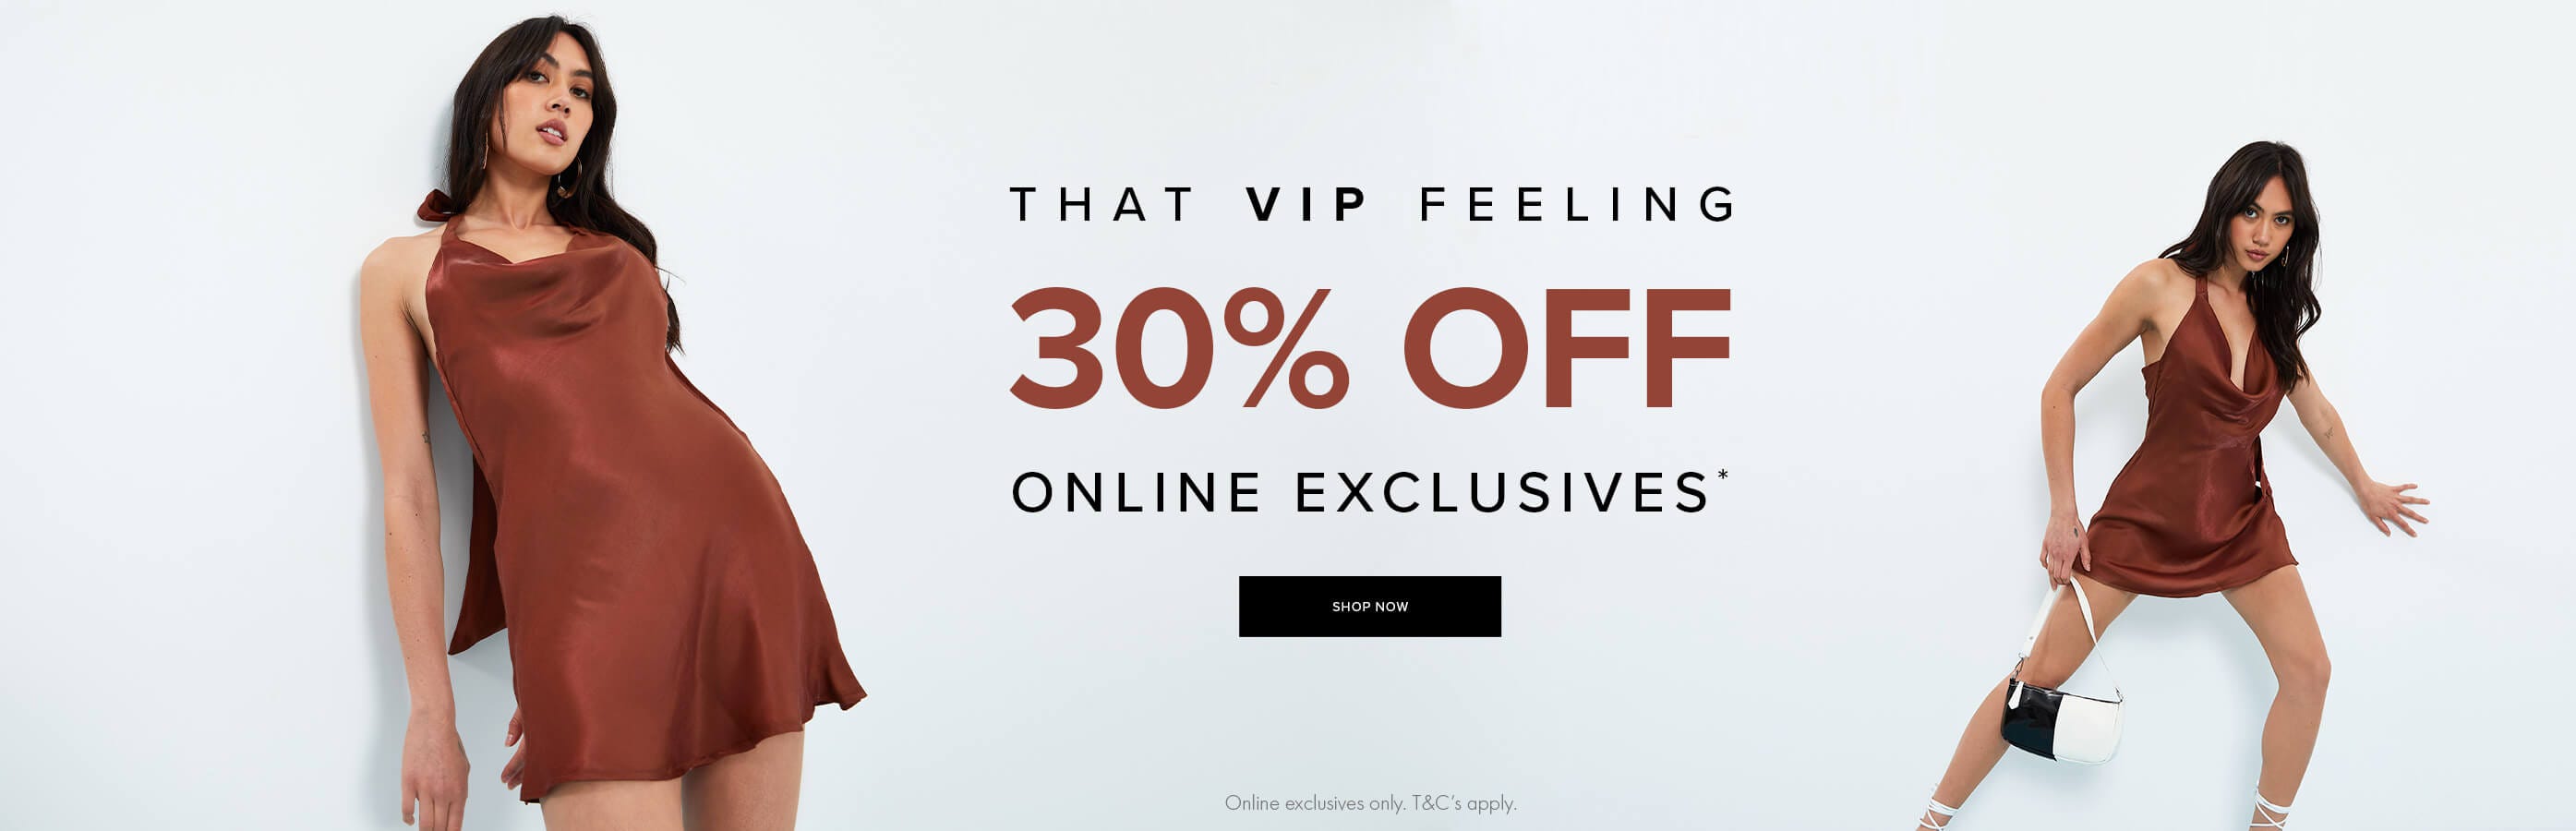 30% OFF on online exclusives at Ally Fashion